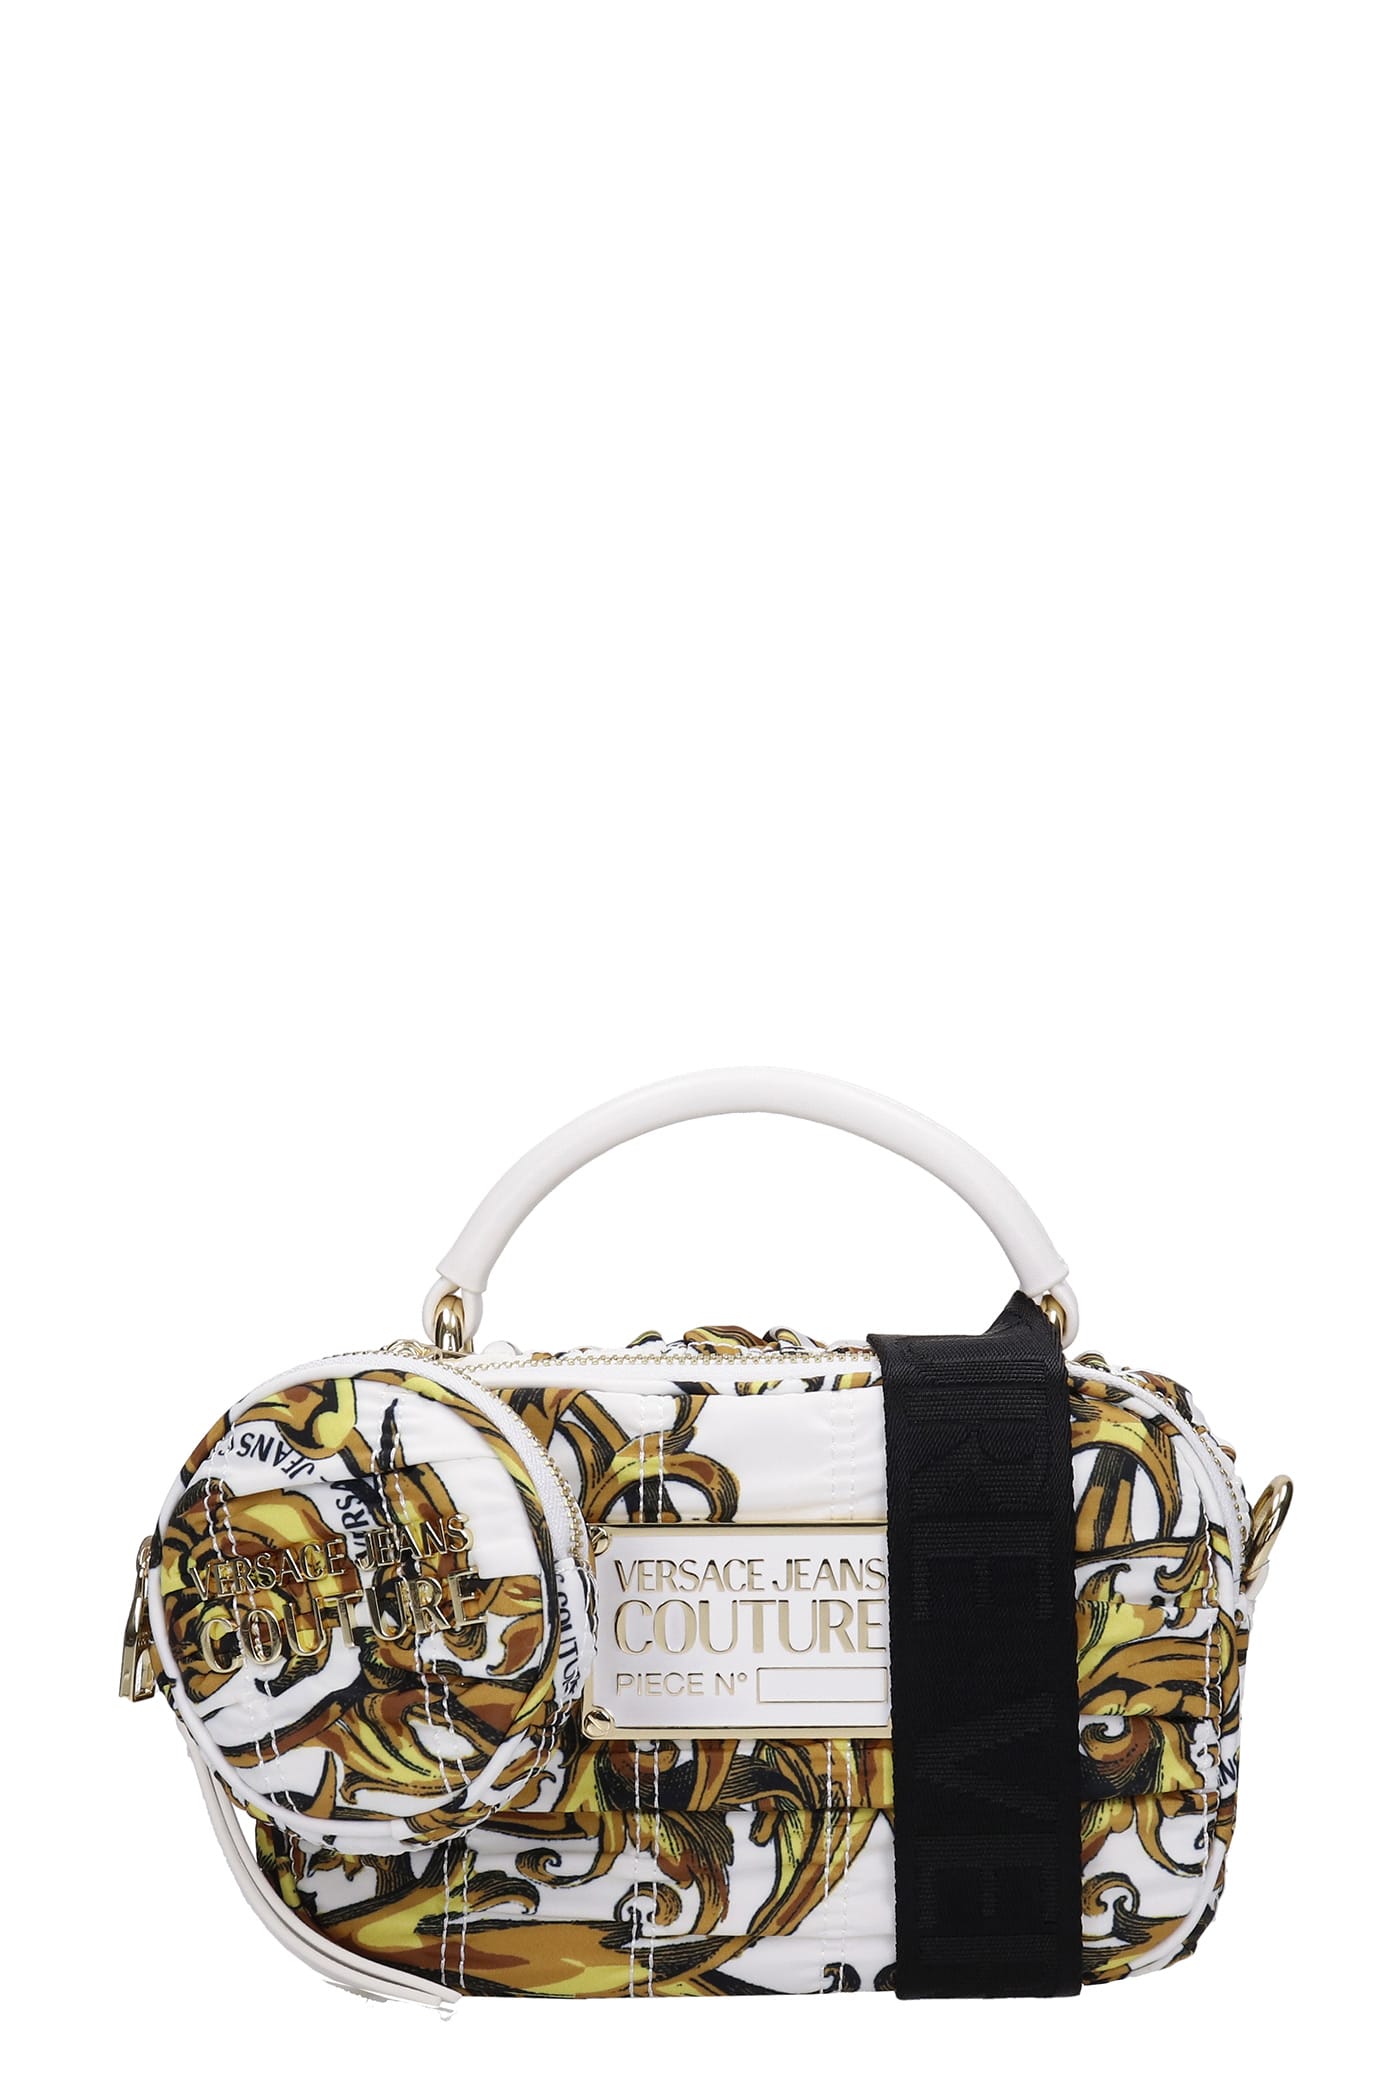 Versace Jeans Couture Hand Bag In White Nylon